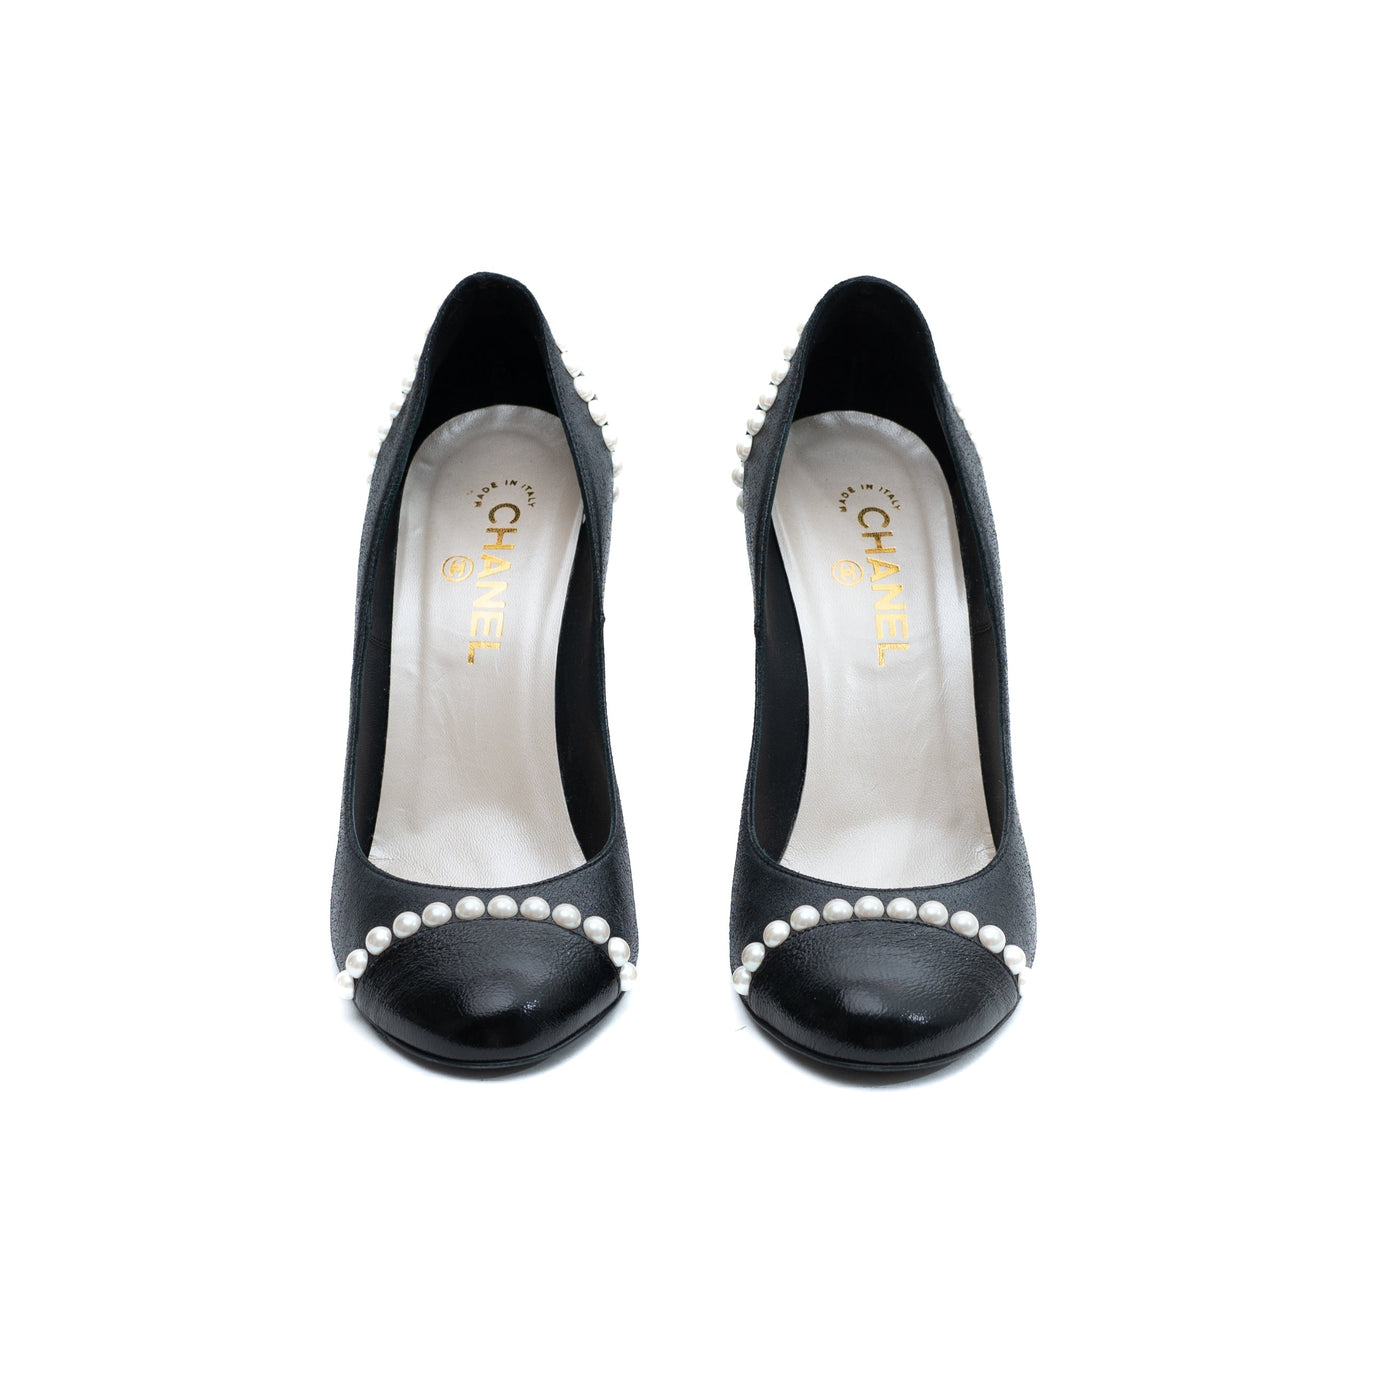 Chanel black leather pump embellished with faux pearl pre-owned